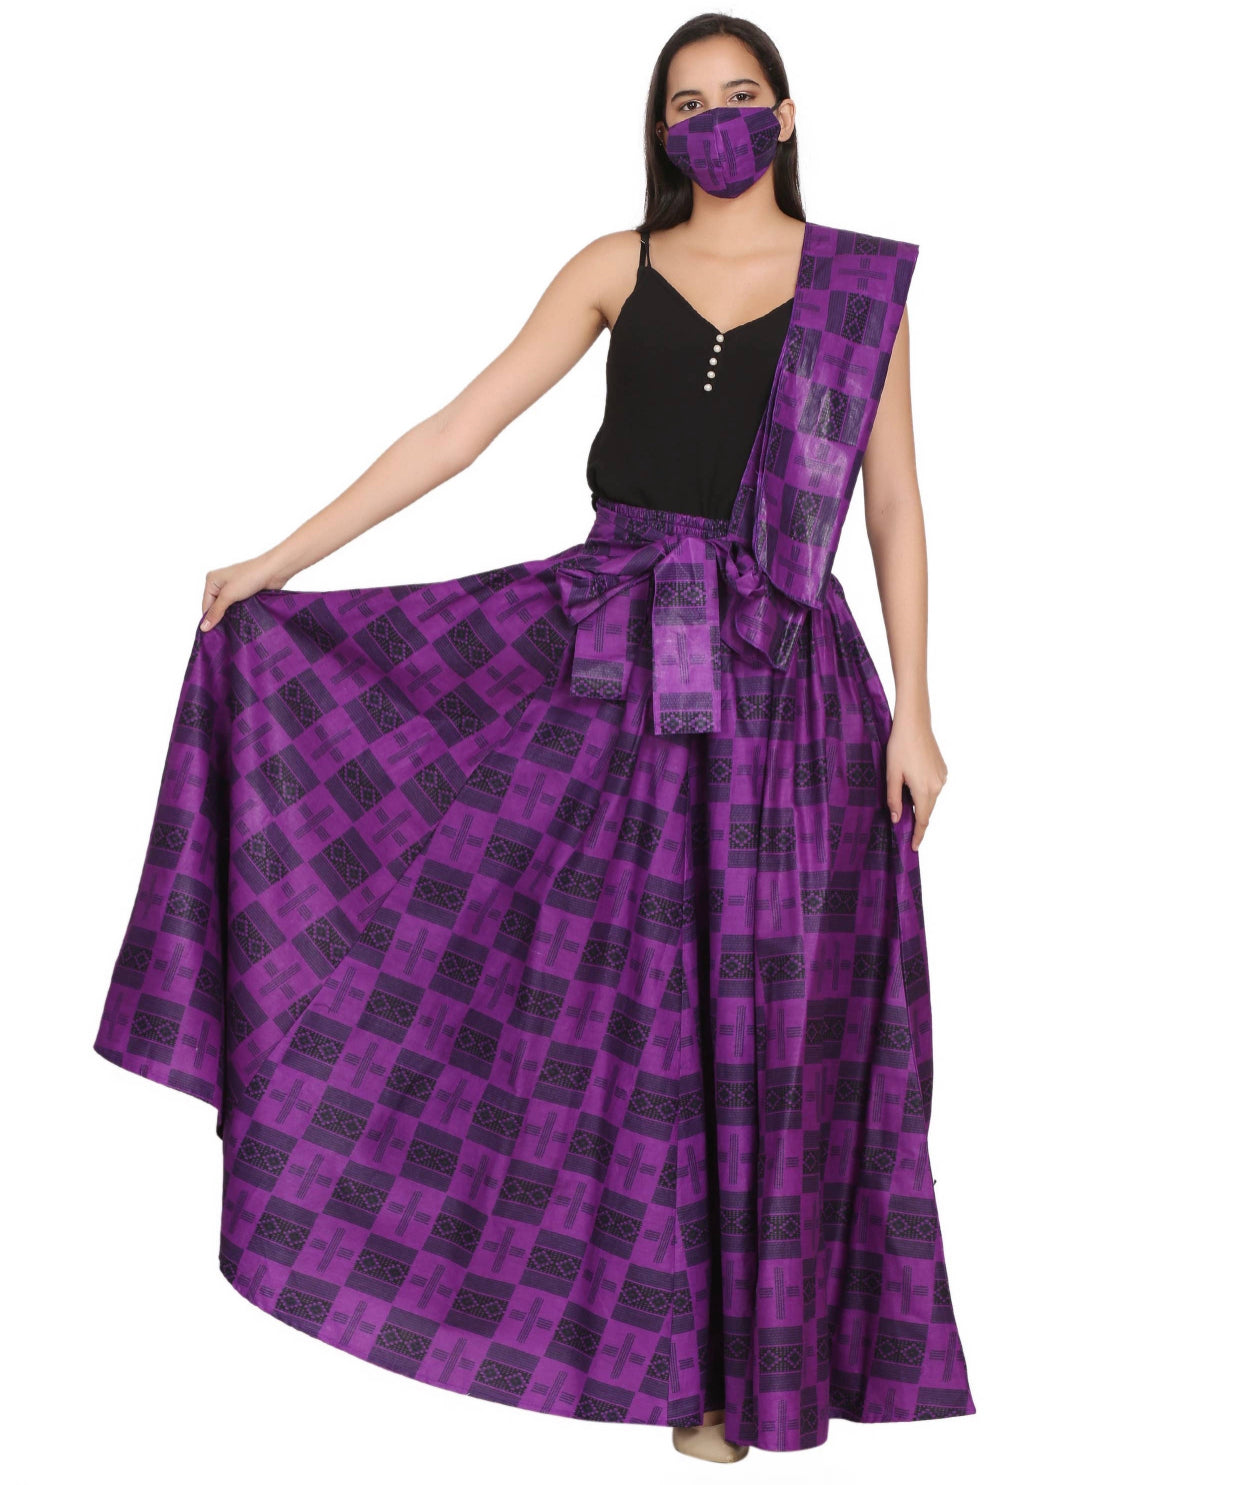 Hand Made African Print Full Skirt with Coordinating Head Wrap and Facemask (Purple and Black Squared)